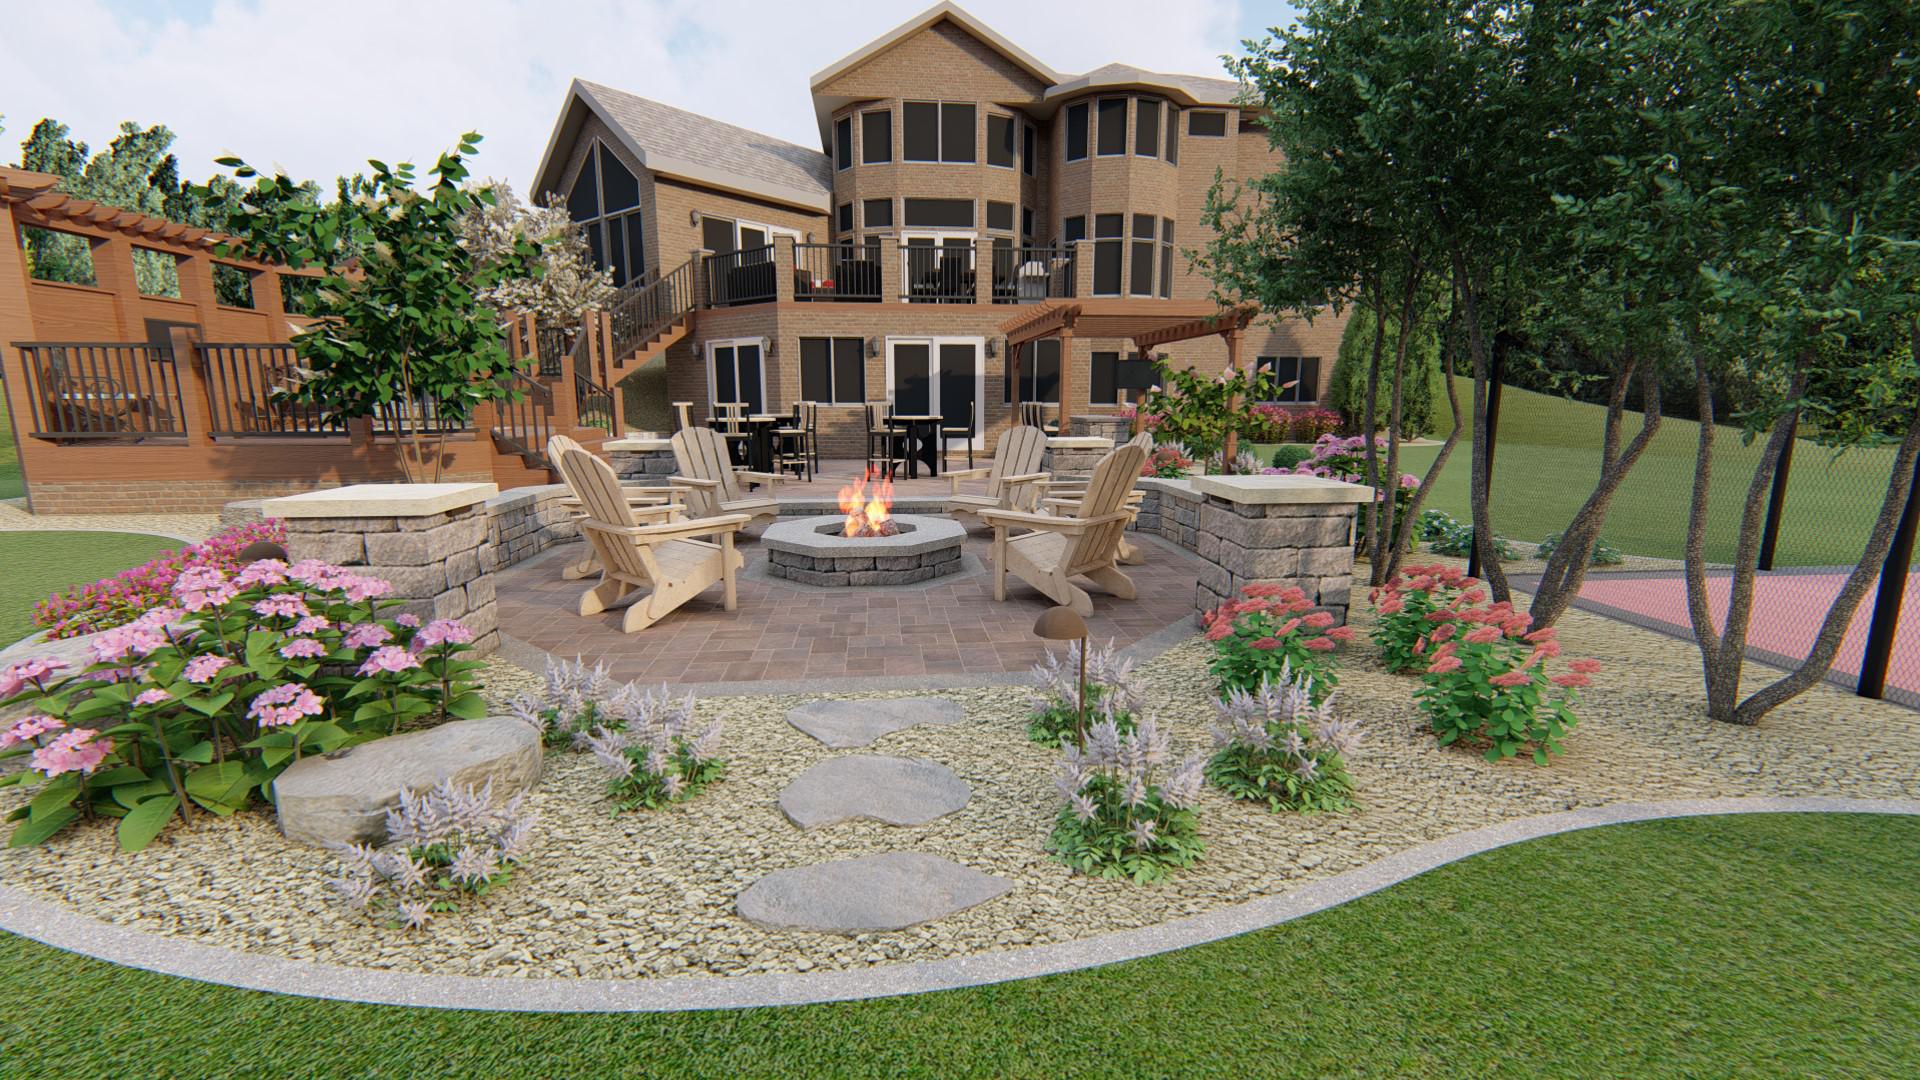 At Spear’s, we utilize the best 3D technology to create a digital model of your landscape, allowing you to see what it will look like before any work begins. We can make changes and adjustments to the design until it's just right, making sure that every detail is exactly how you want it. Contact us today to talk with a Spear’s professional about bringing your vision to life!